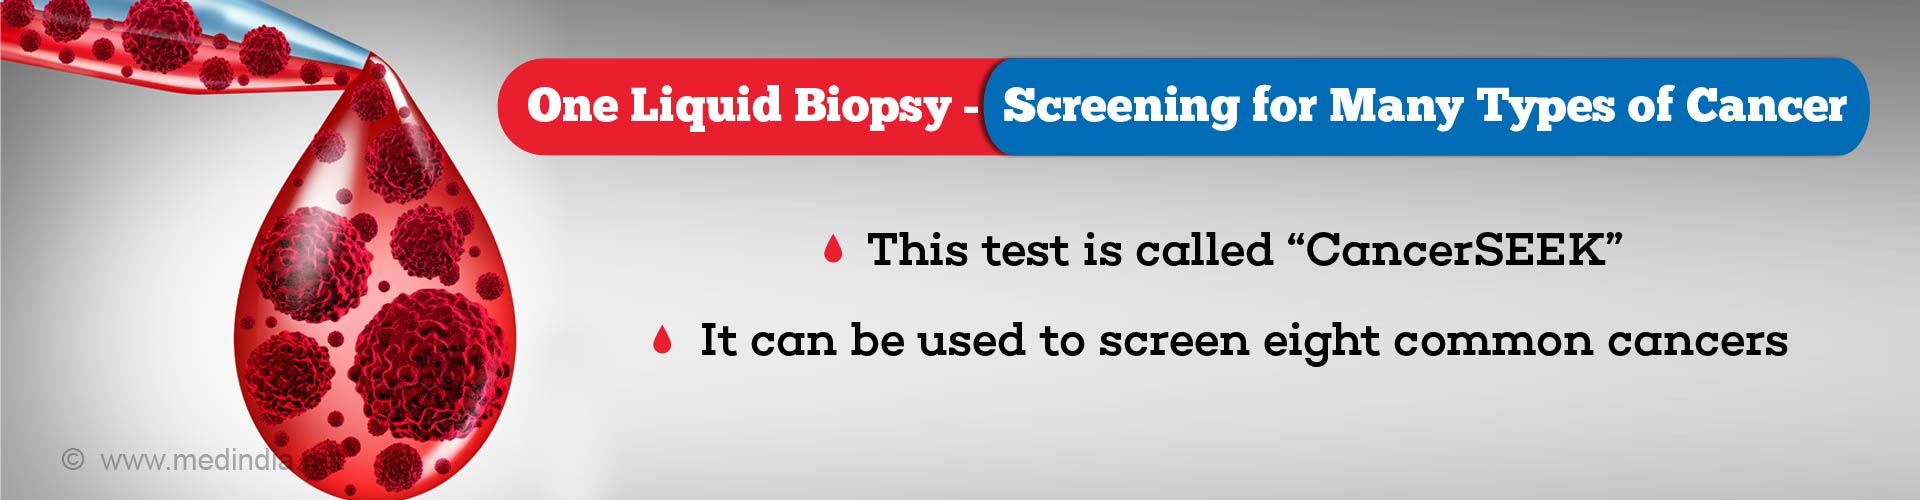 one liquid biopsy - screening for many types of cancer
- this test is called 